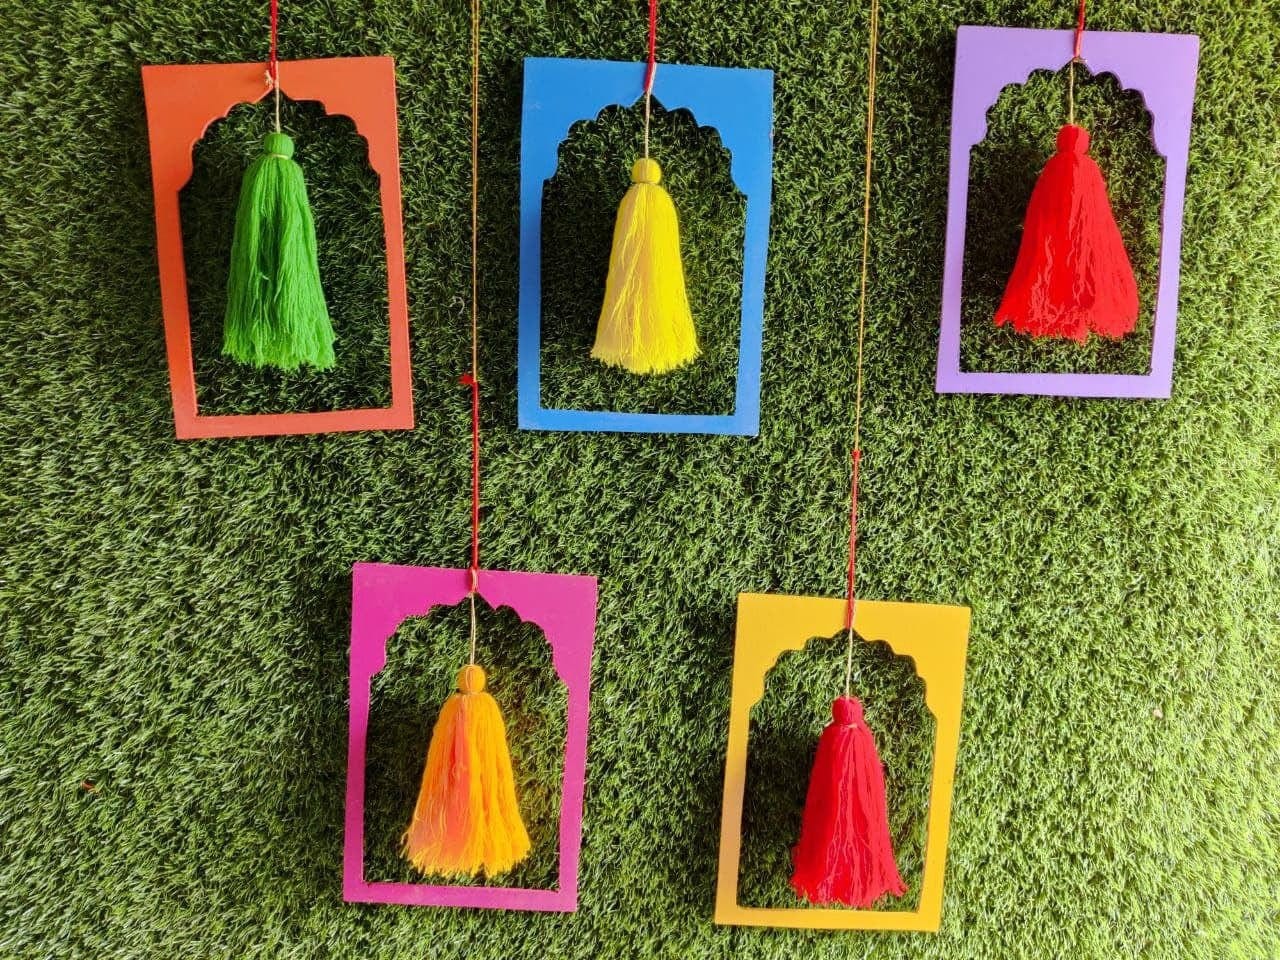 Lamansh event decoration Assorted colors / Woolen Tassels / 10 LAMANSH® 10pcs Frame Style Tassels (7*11 inch) hangings for indian wedding decoration & backdrops / ethnic event decoration products